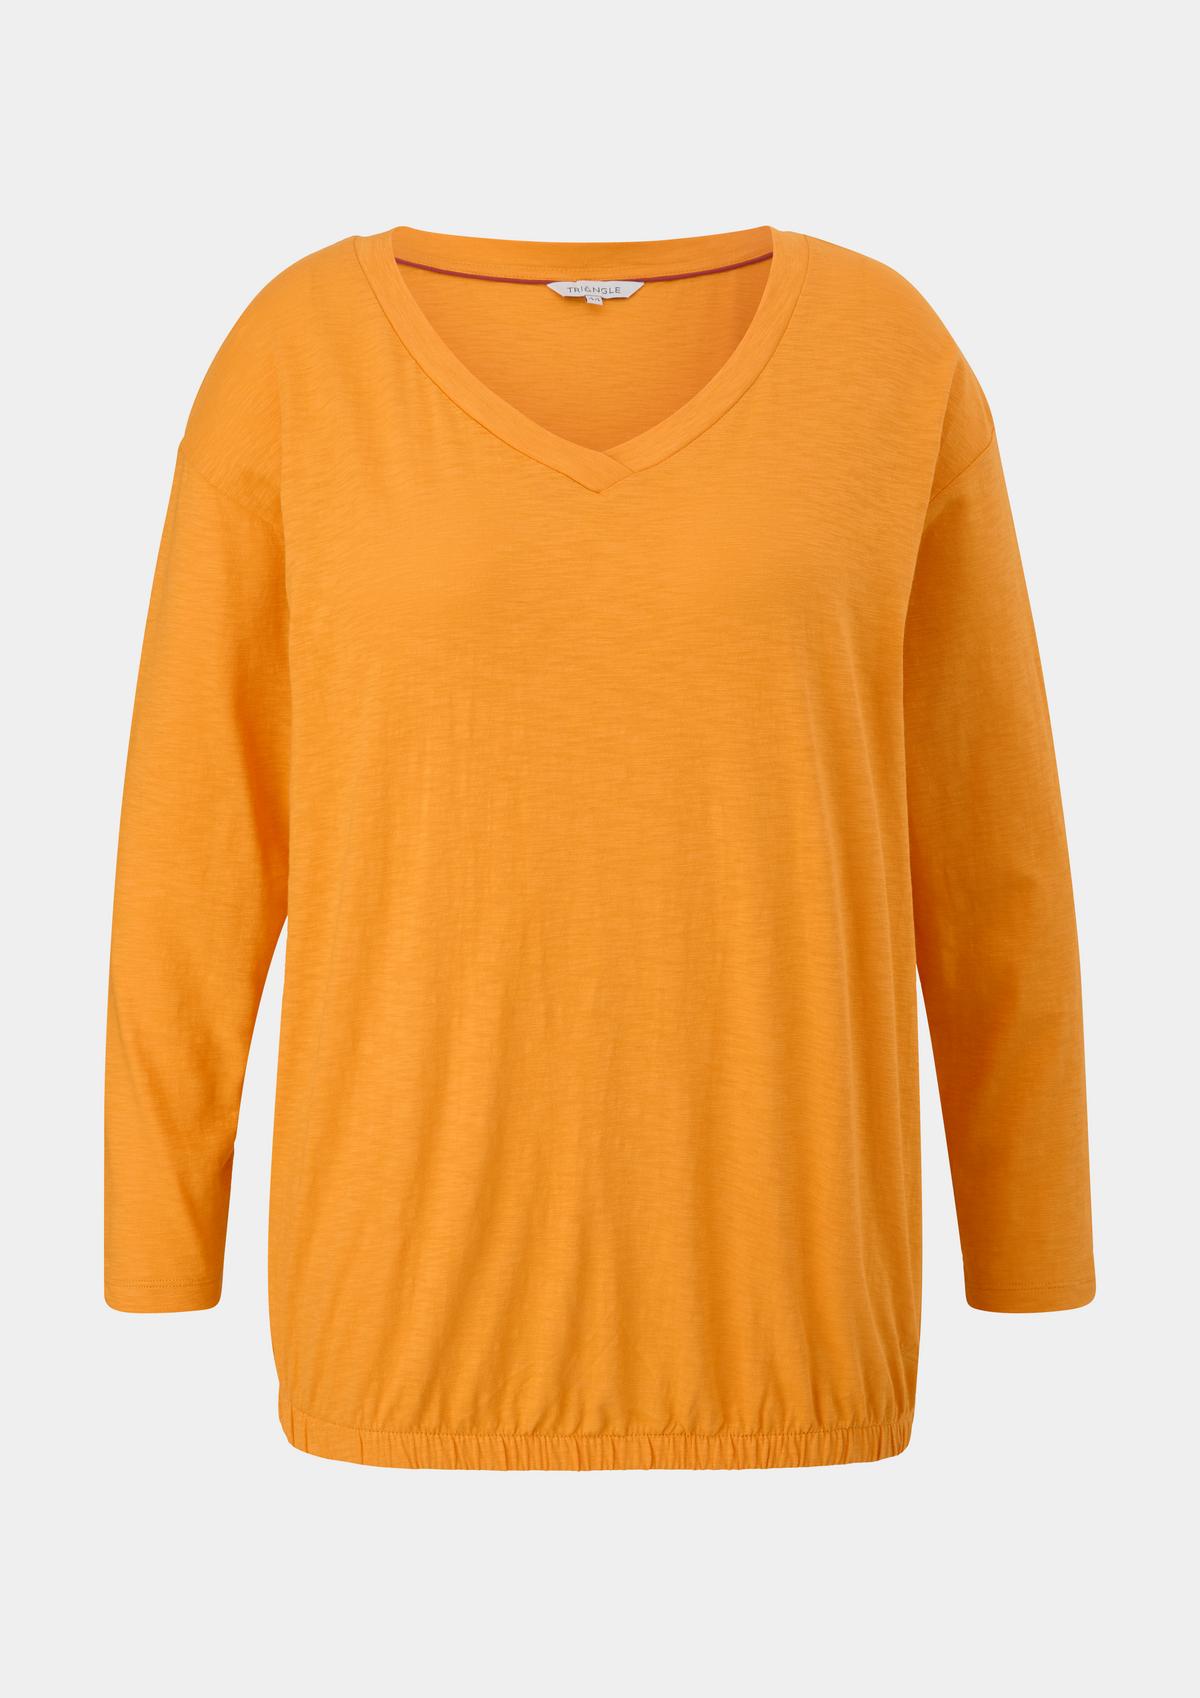 s.Oliver Long sleeve top with an elasticated hem